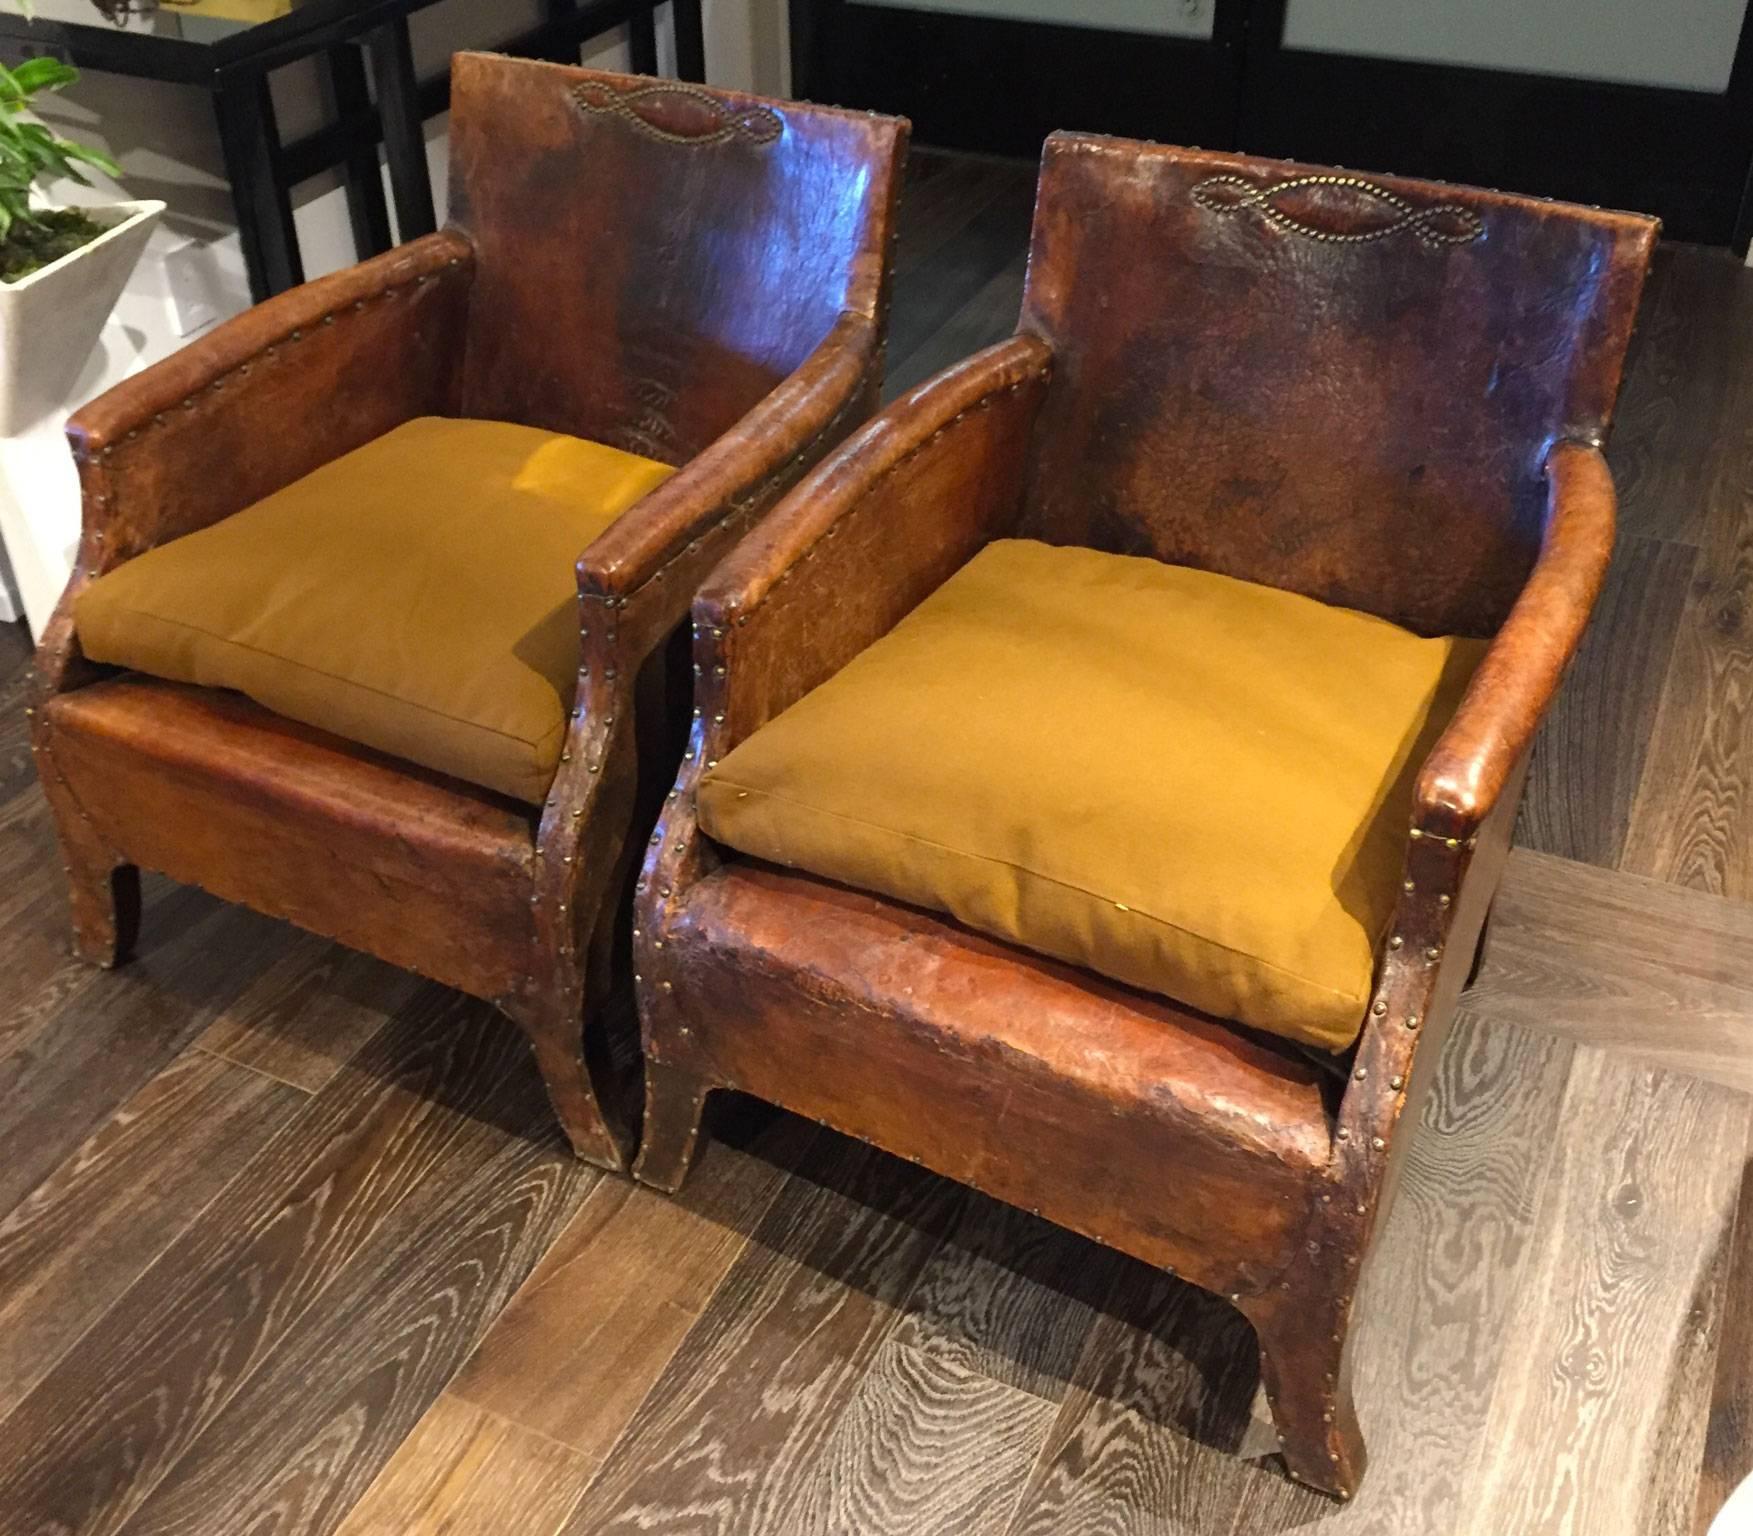 A pair of French leather chairs with mustard colored seat cushions. The chairs were made in 1930, and have beautiful nailhead detailing throughout.